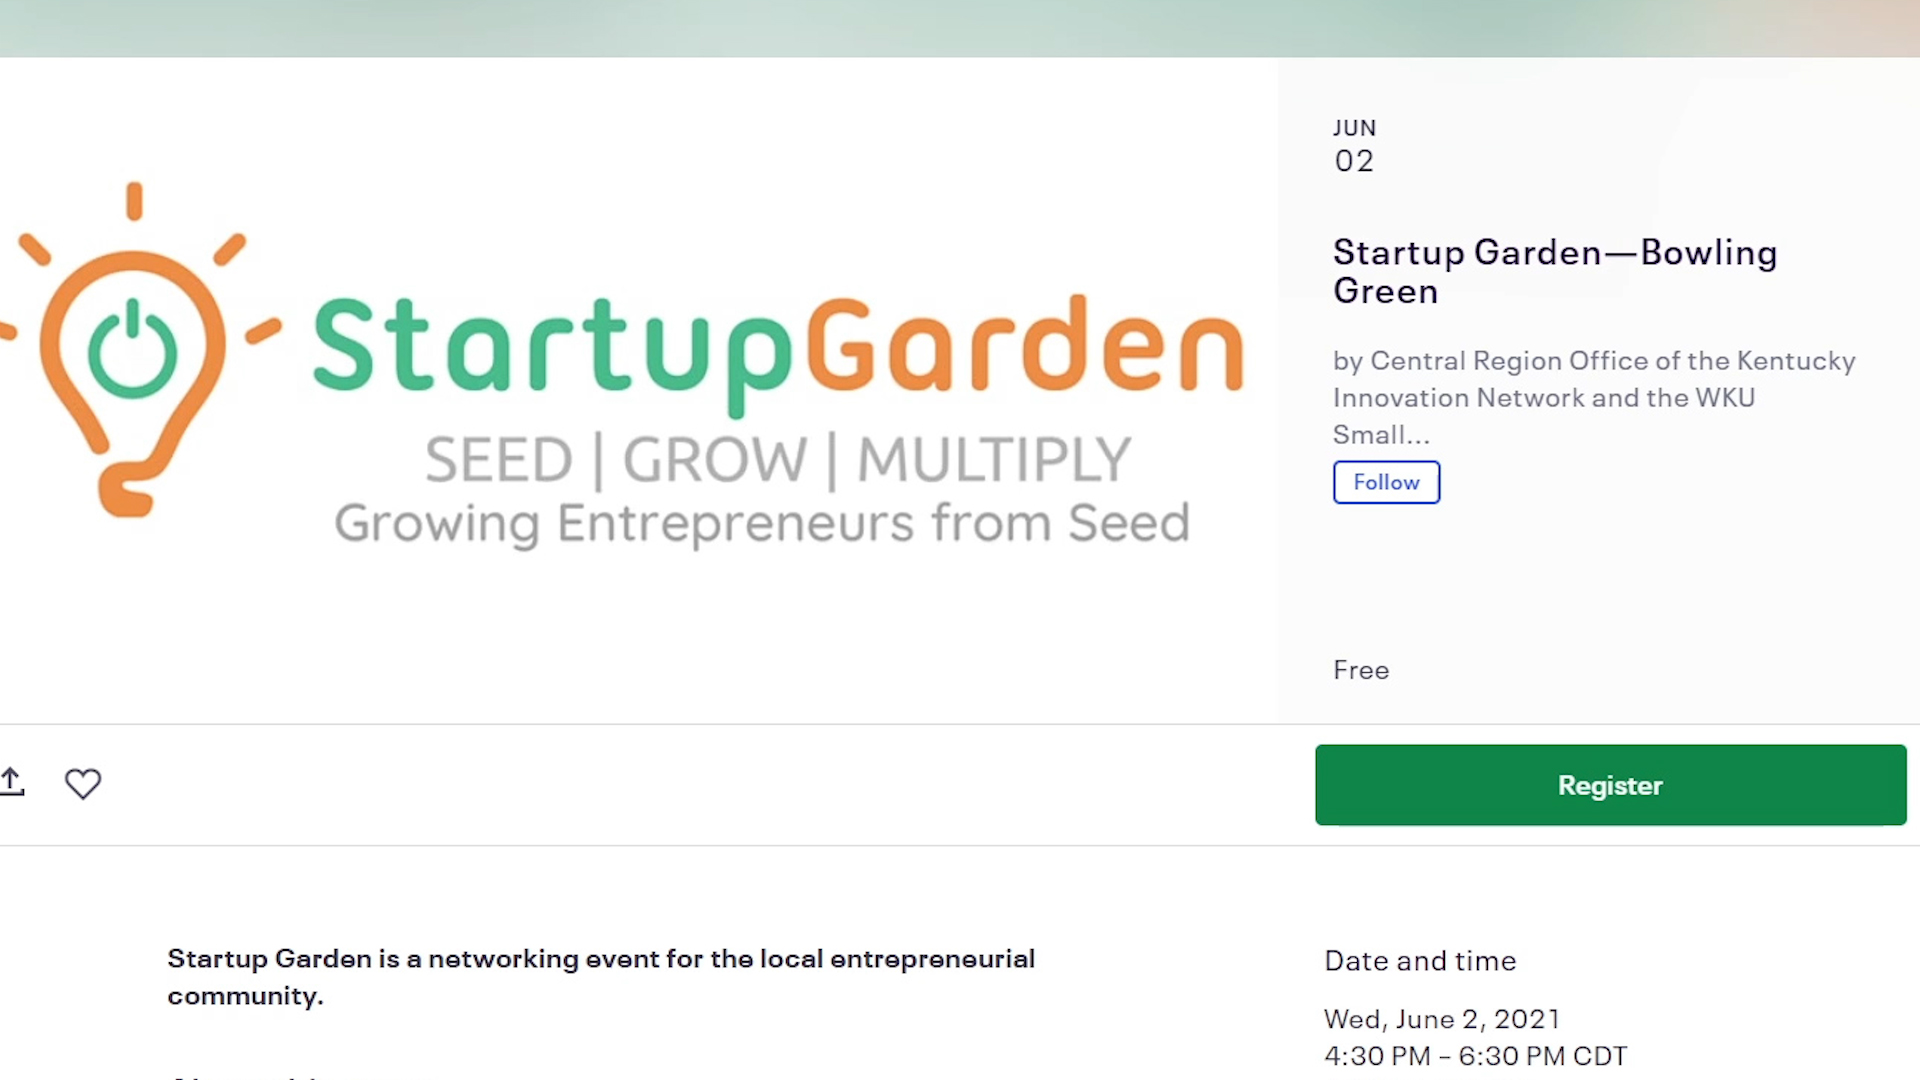 Startup Garden program to come to Bowling Green - WNKY News 40 Television